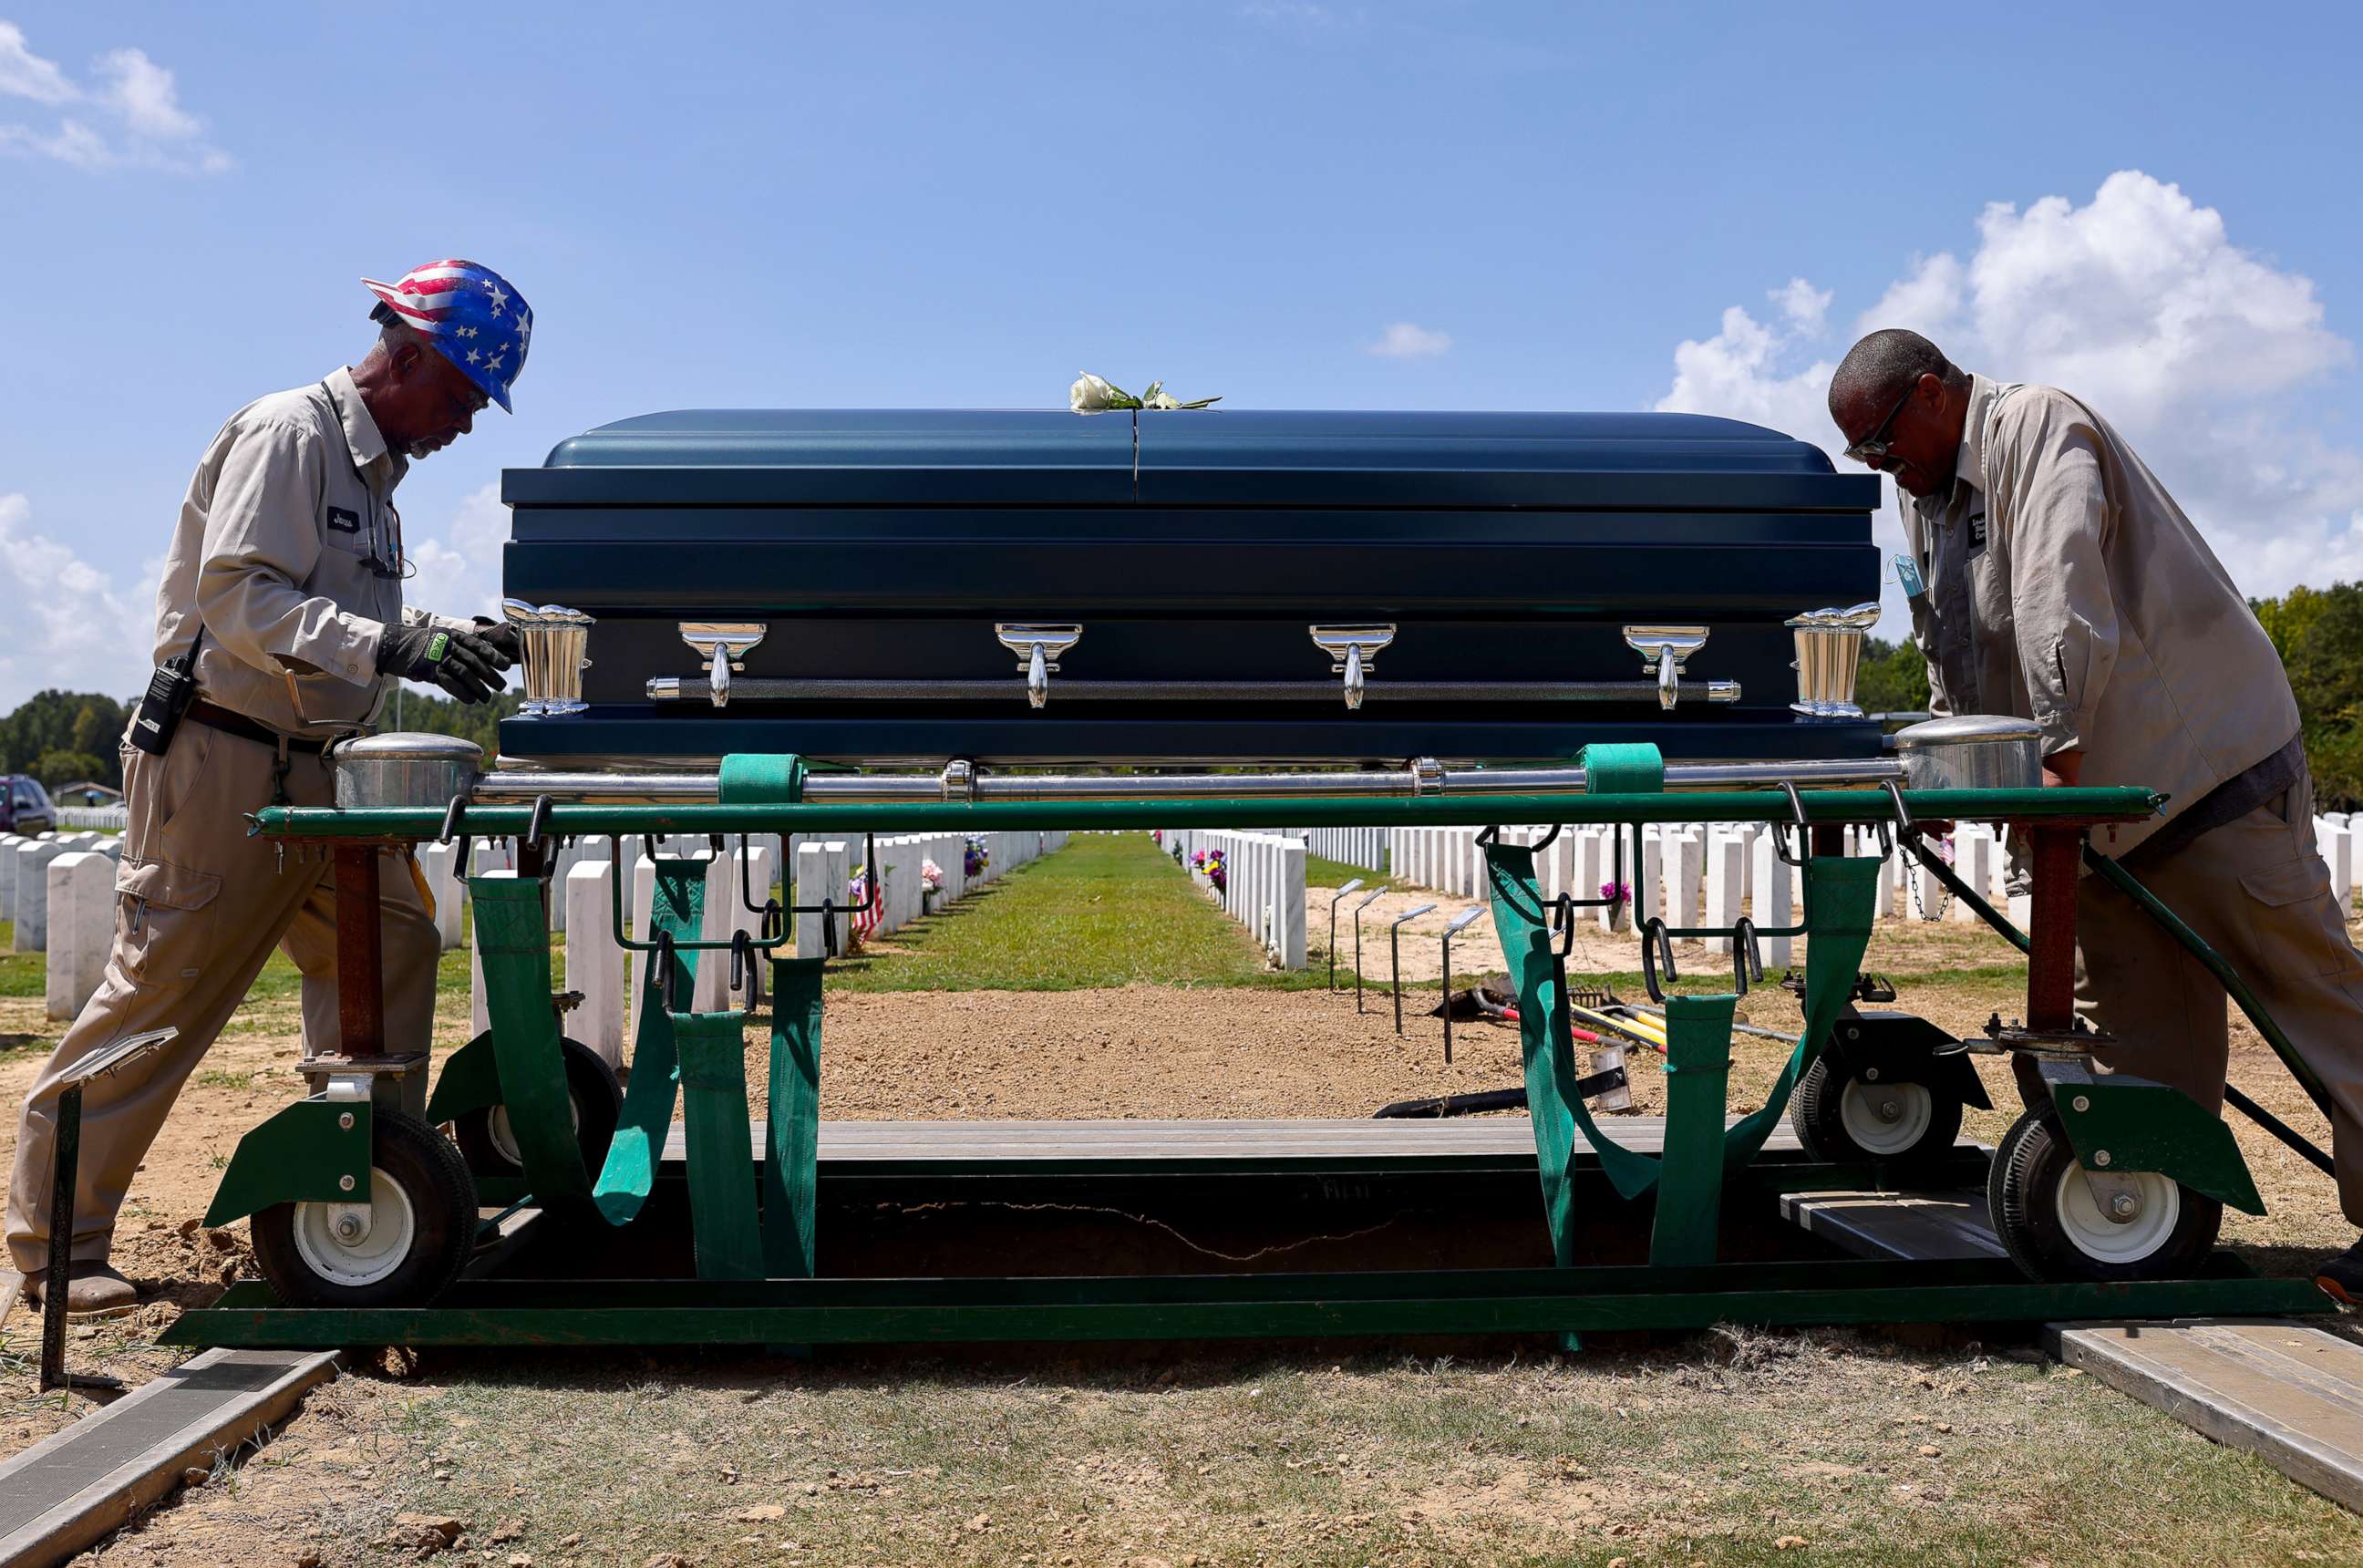 PHOTO: In this Aug. 20, 2021, file photo, caretakers prepare to inter the casket of a person who passed away from complications caused by COVID-19, at Louisiana National Cemetery in Zachary, La. 